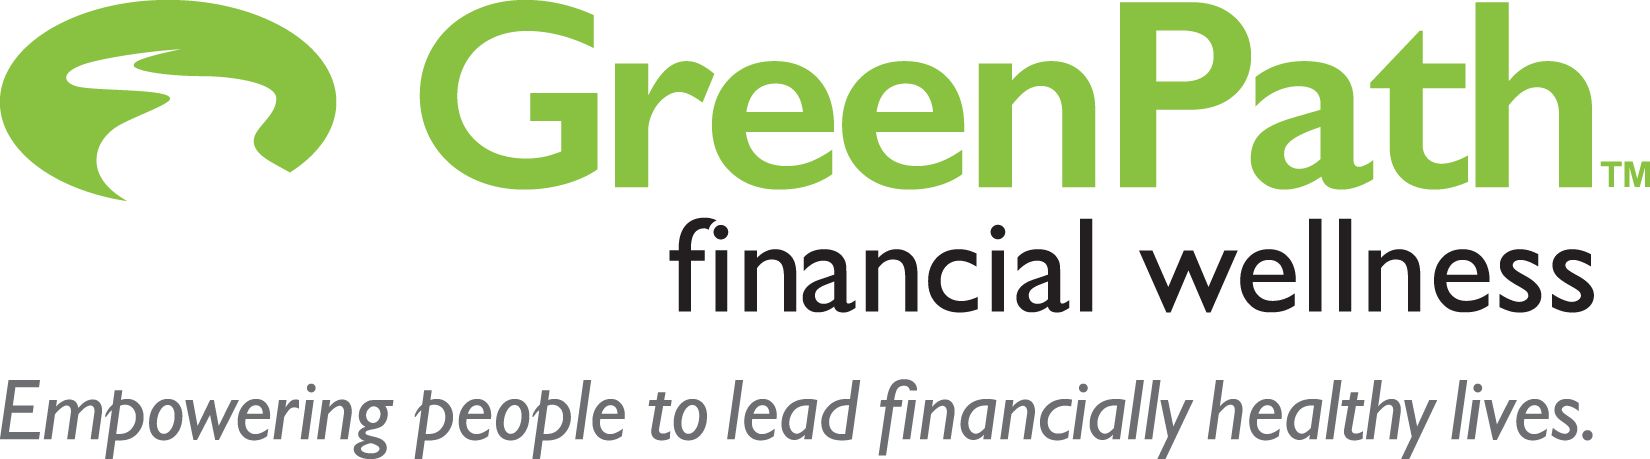 Greenpath Financial Wellness. Empoowering people to lead financially ealthy lives.